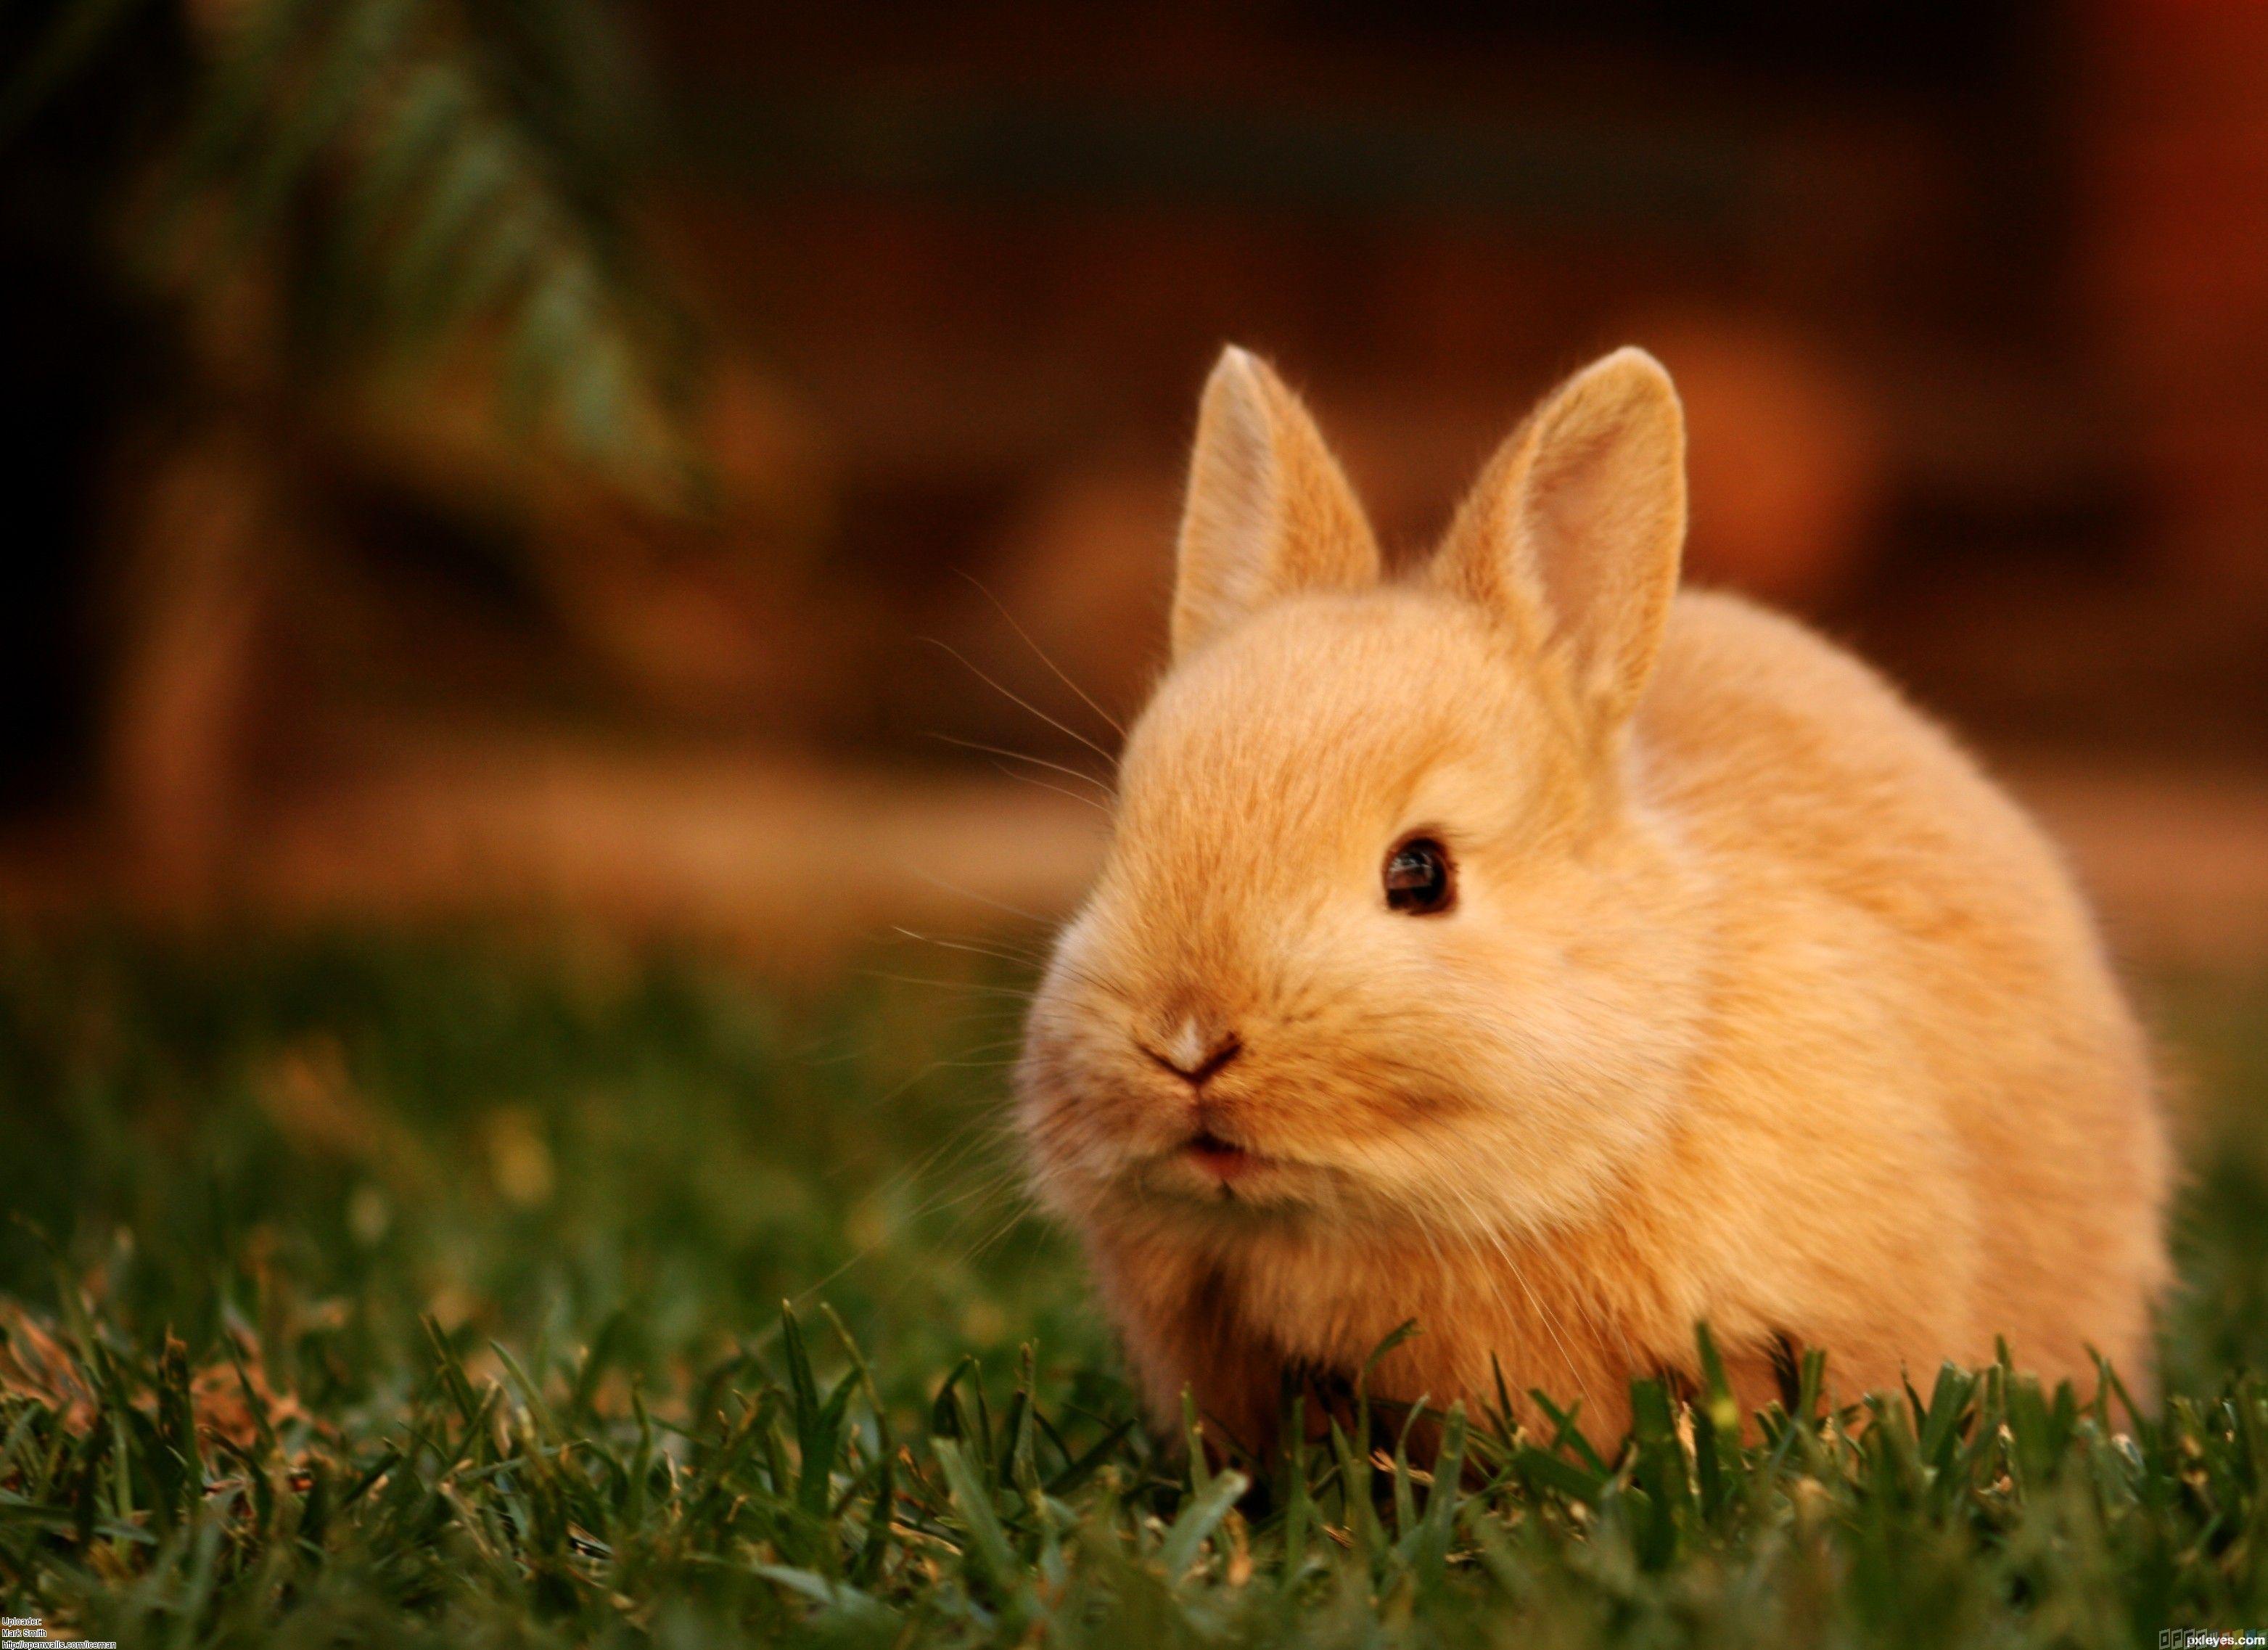 Cute Bunny Wallpapers 68 images